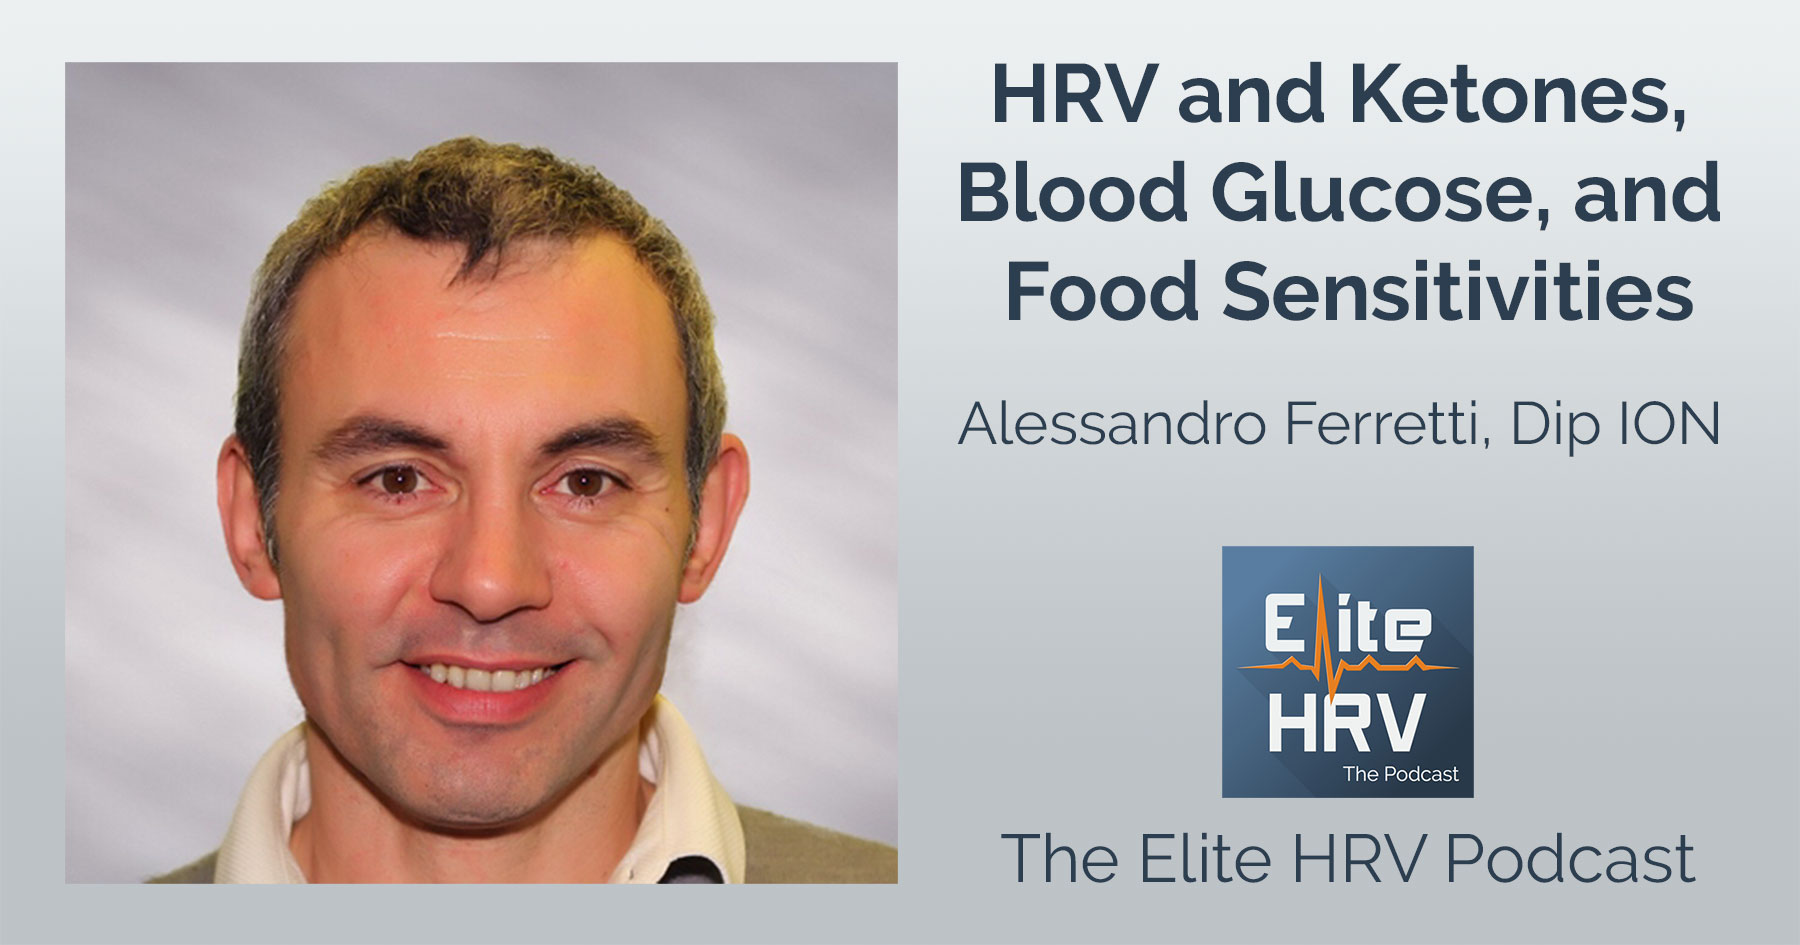 HRV and Ketones, Blood Glucose, and Food Sensitivities with Alessandro Ferretti